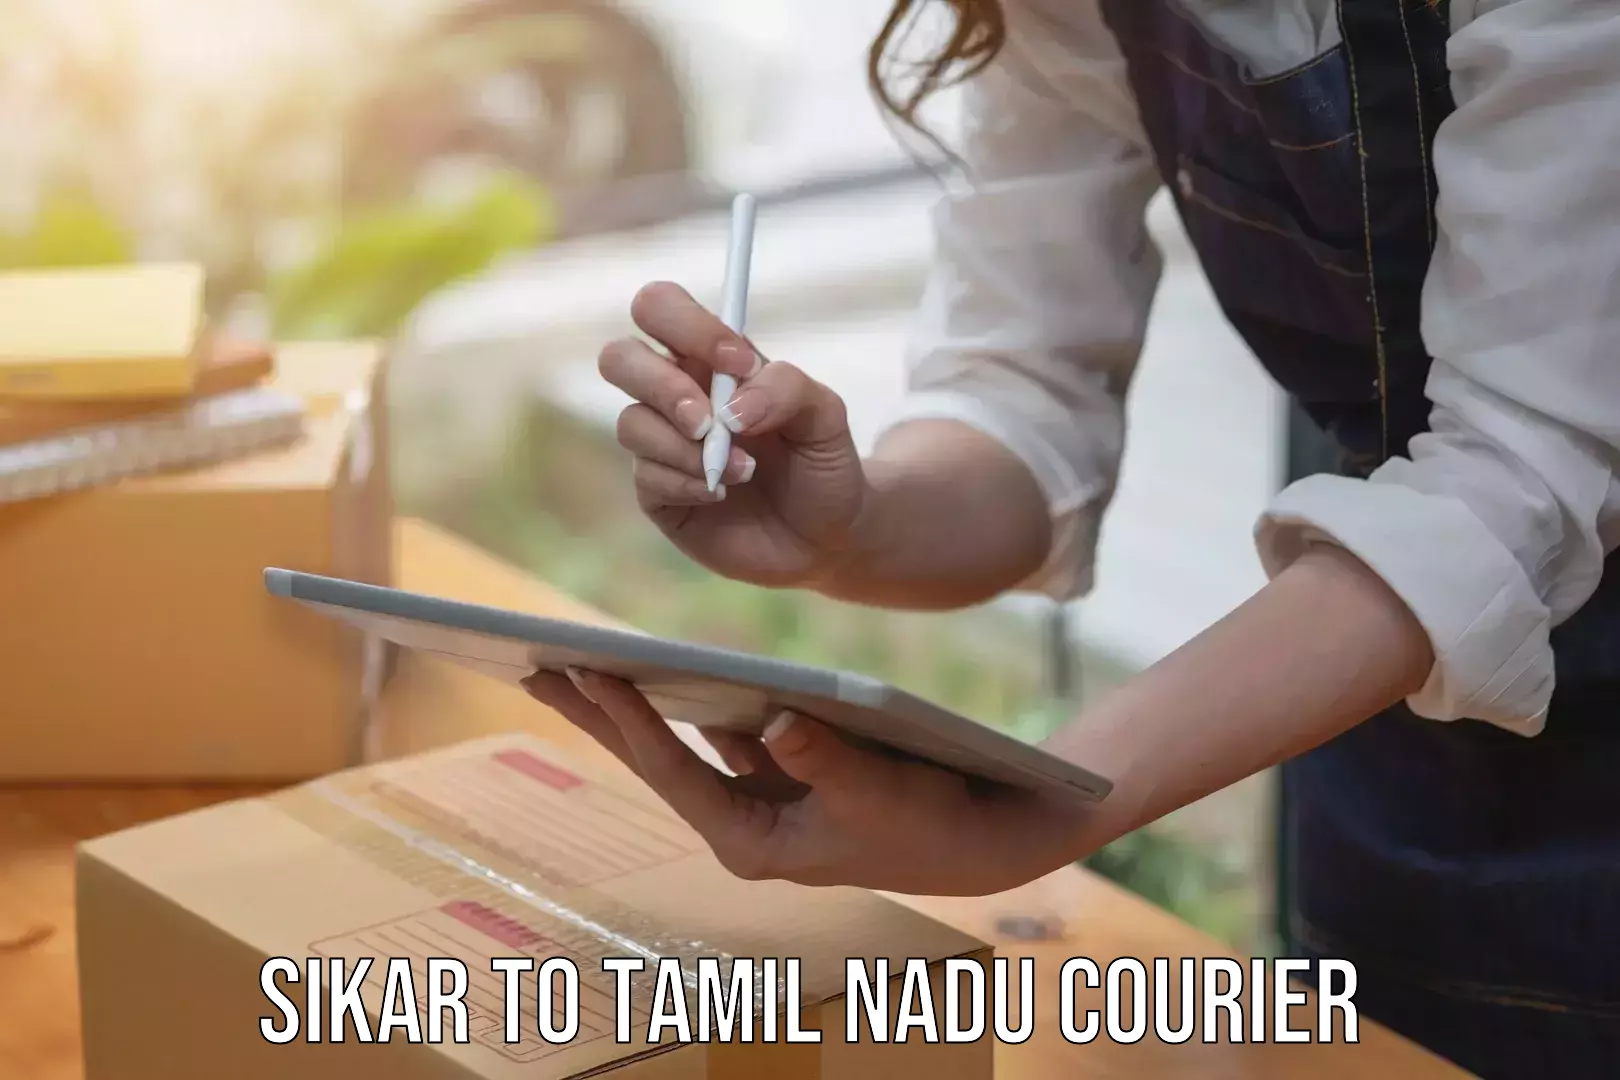 Bulk courier orders Sikar to Vellore Institute of Technology